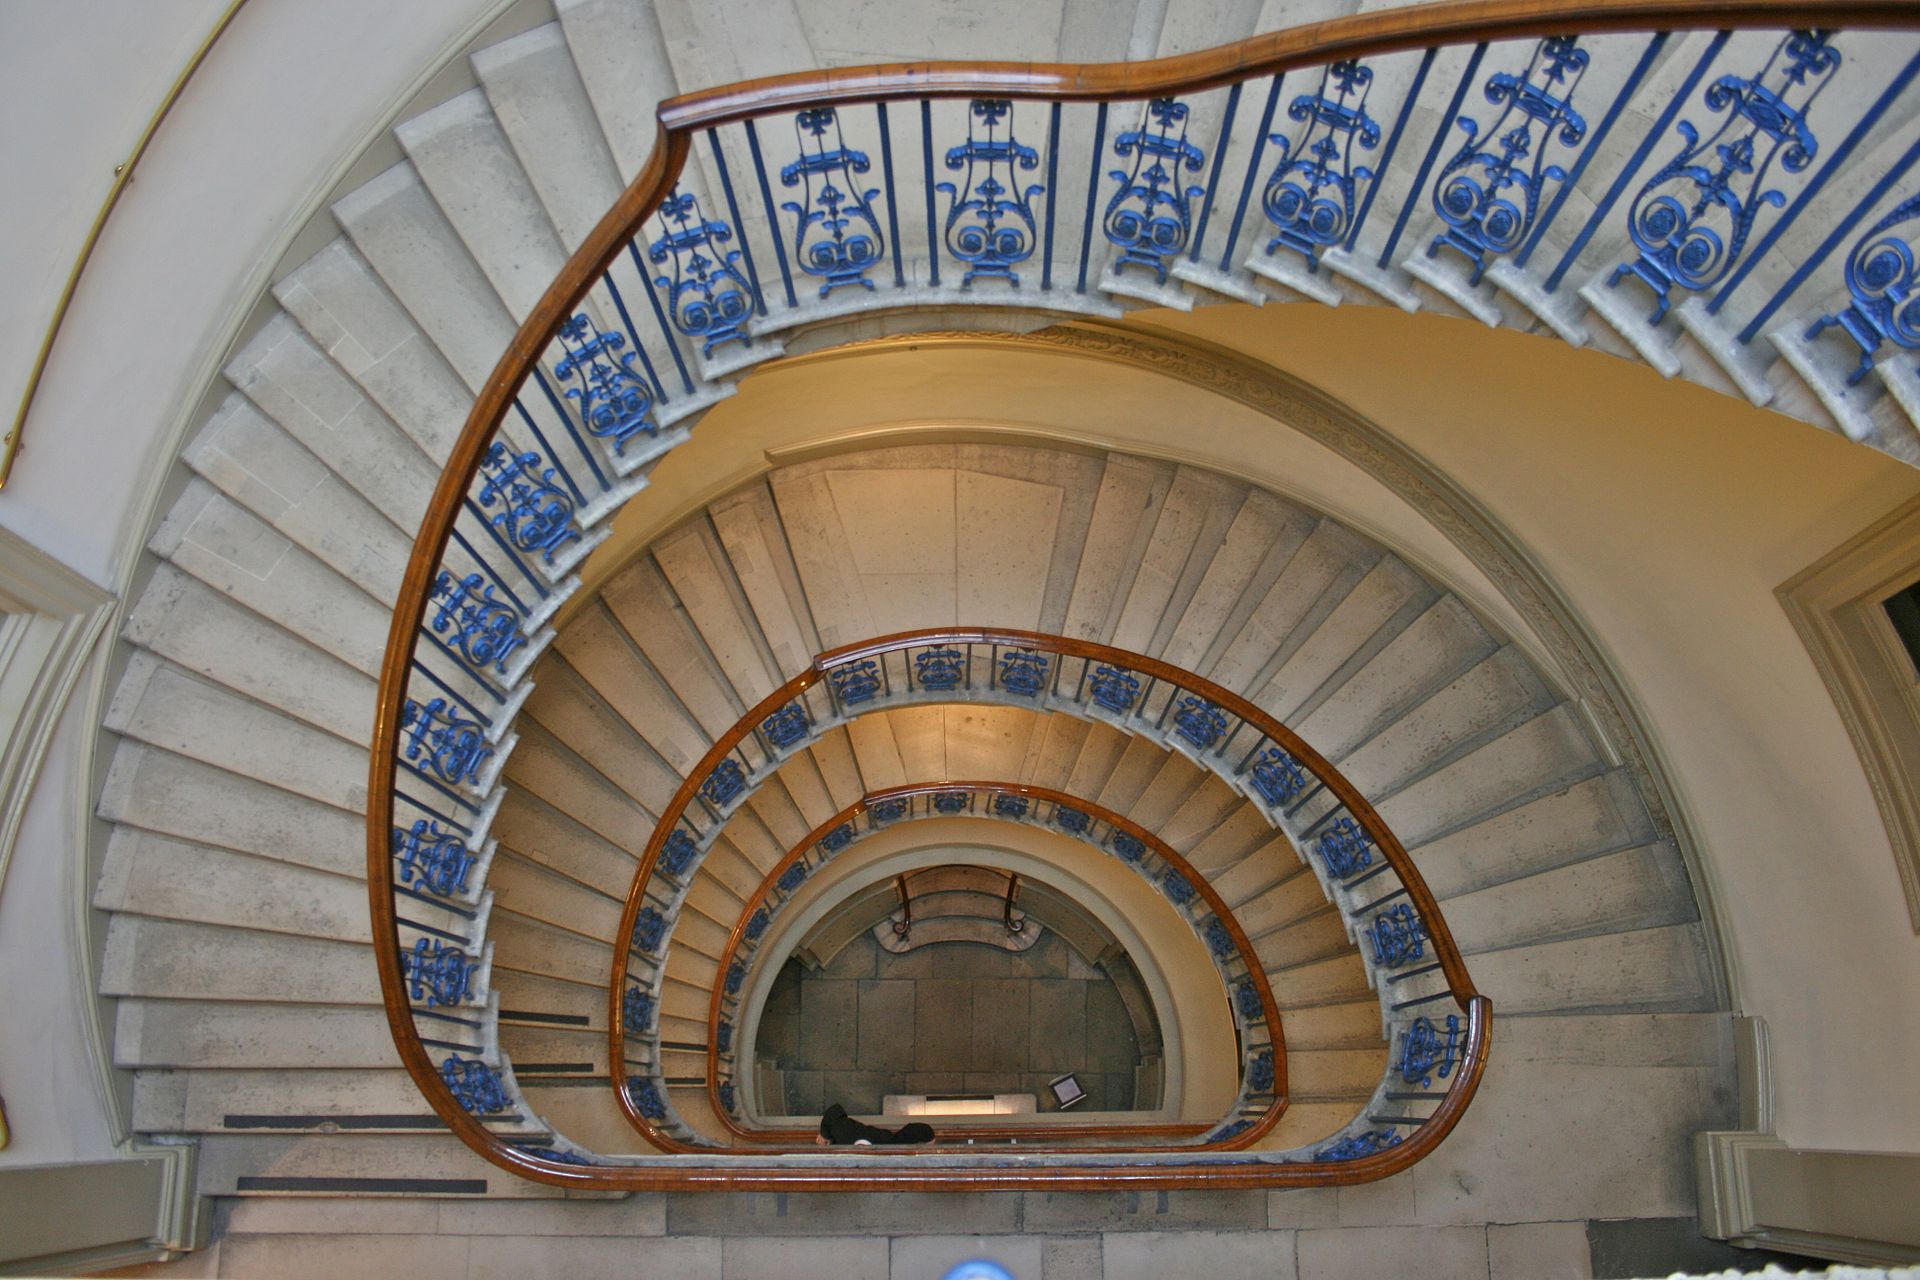 Staircase at the Courtauld Gallery, London, England. Photo by Mike Peel via Wikipedia.